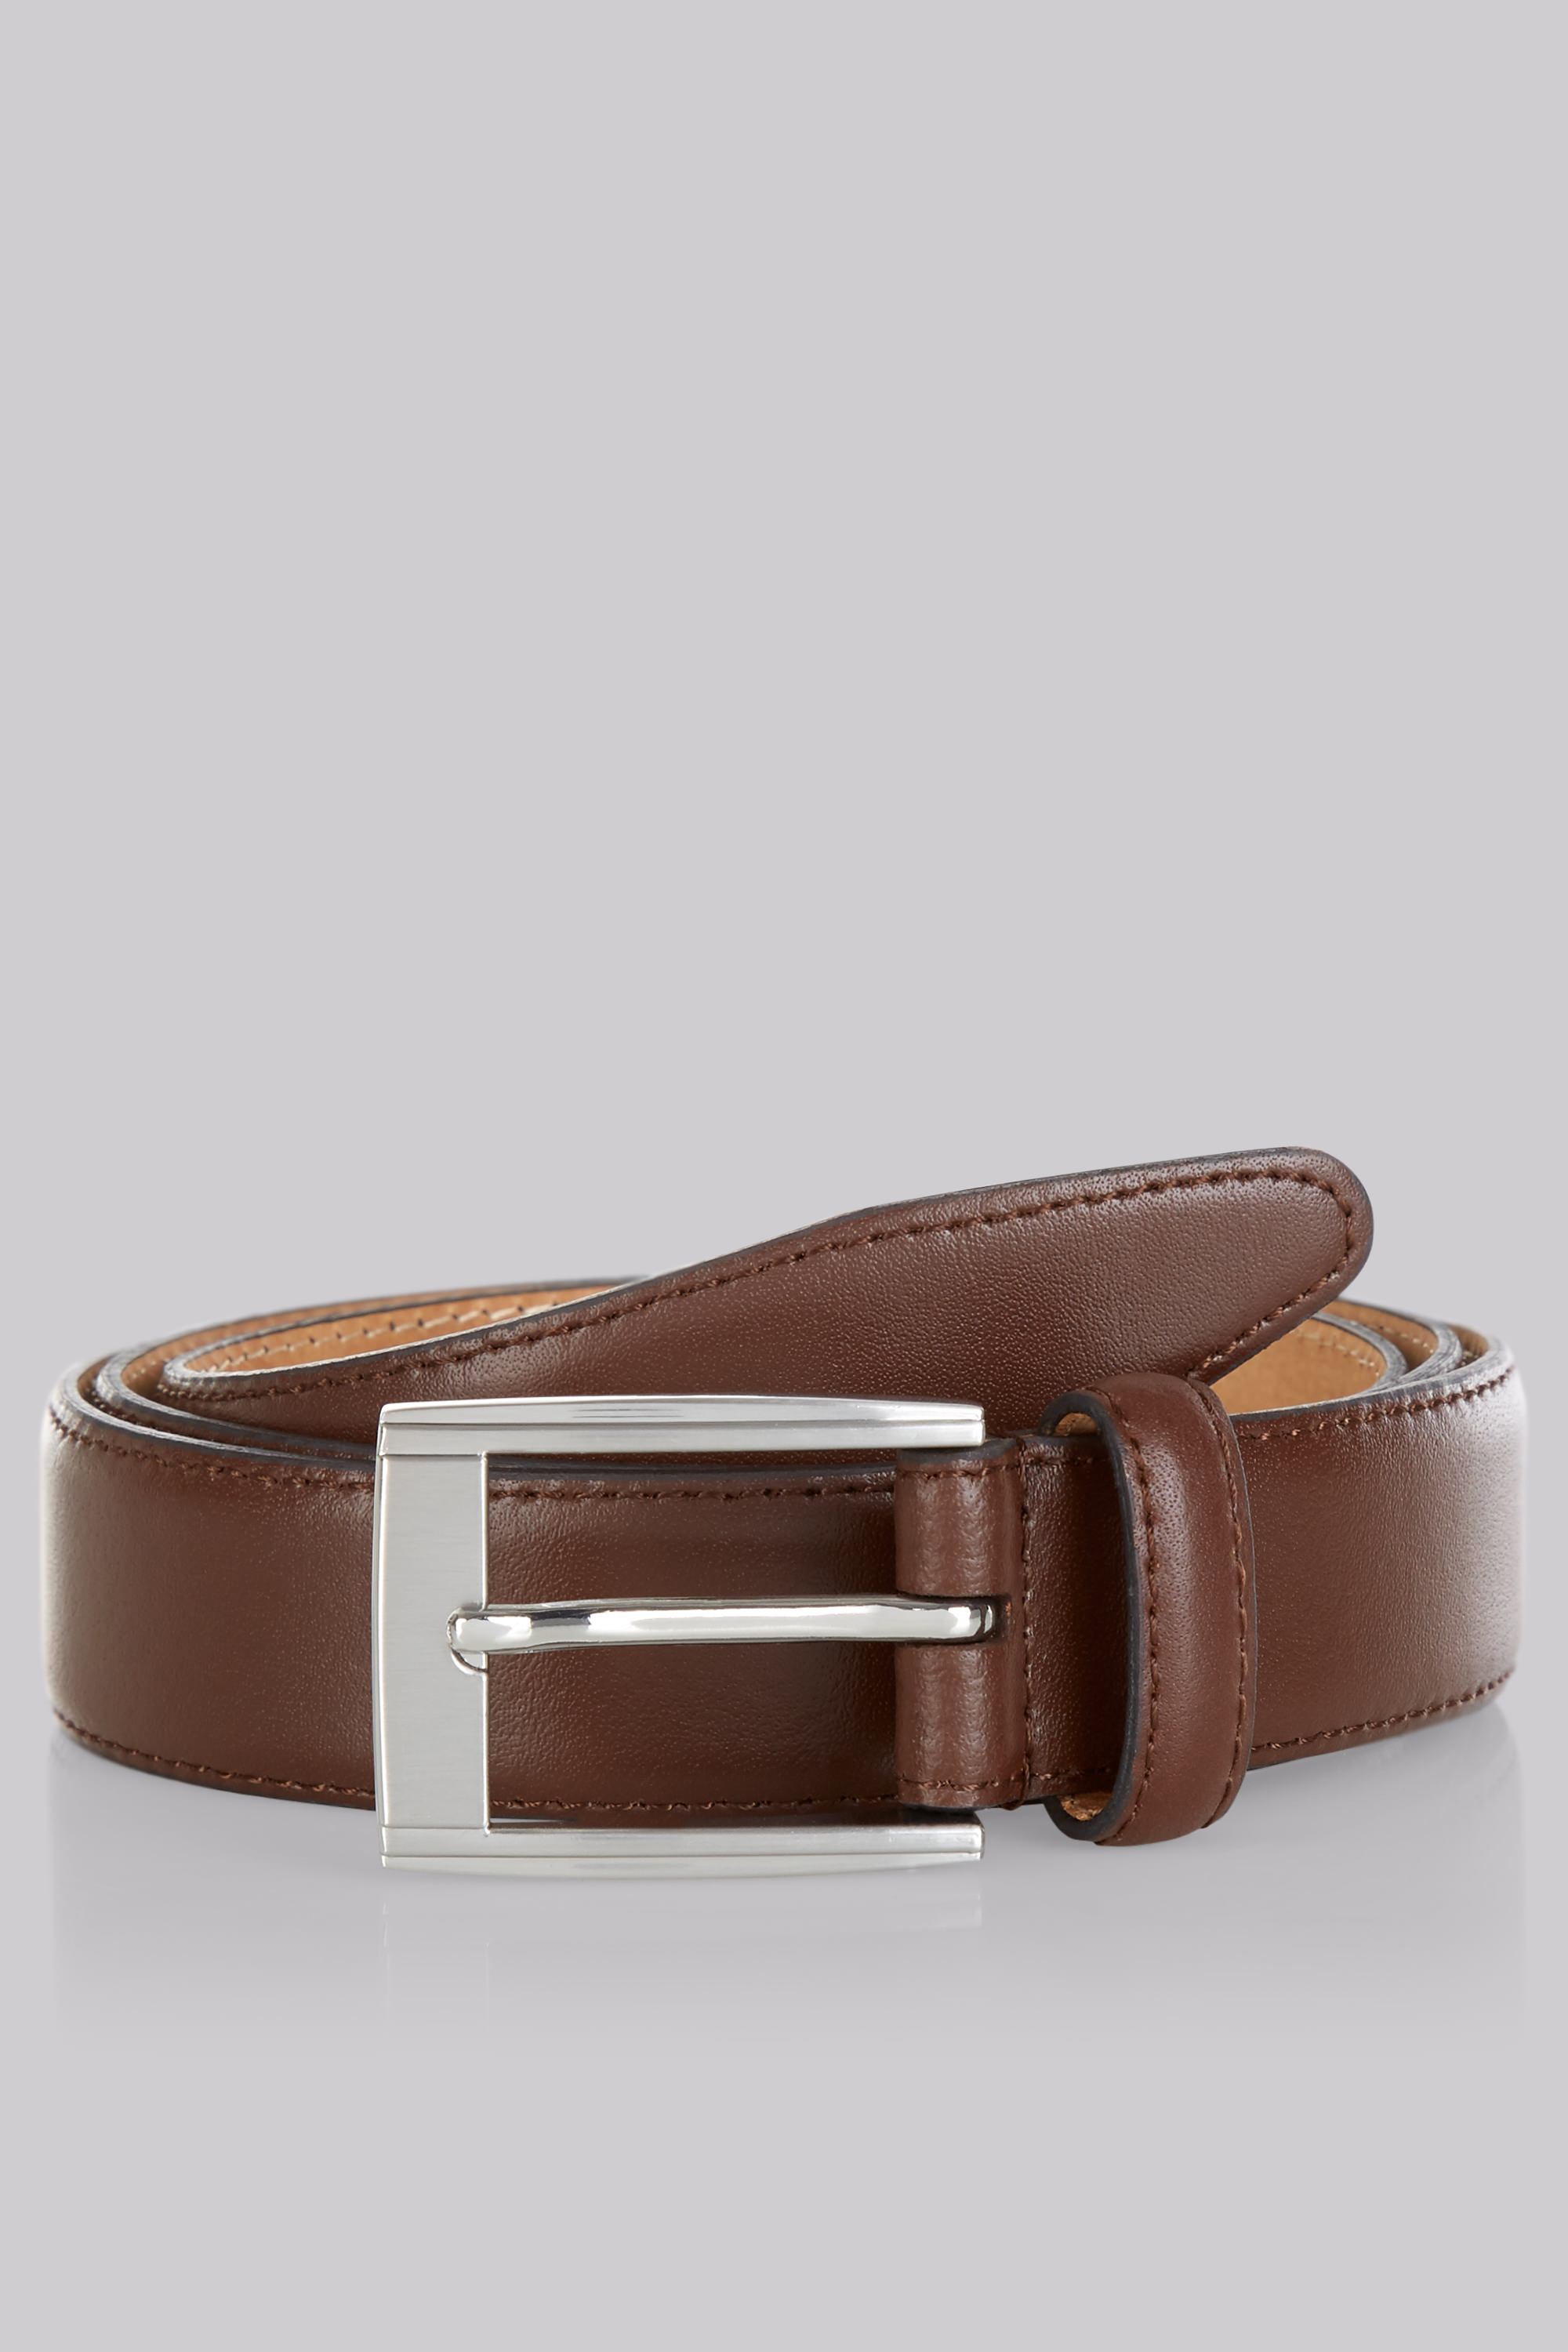 Brown Leather Belt | Buy Online at Moss